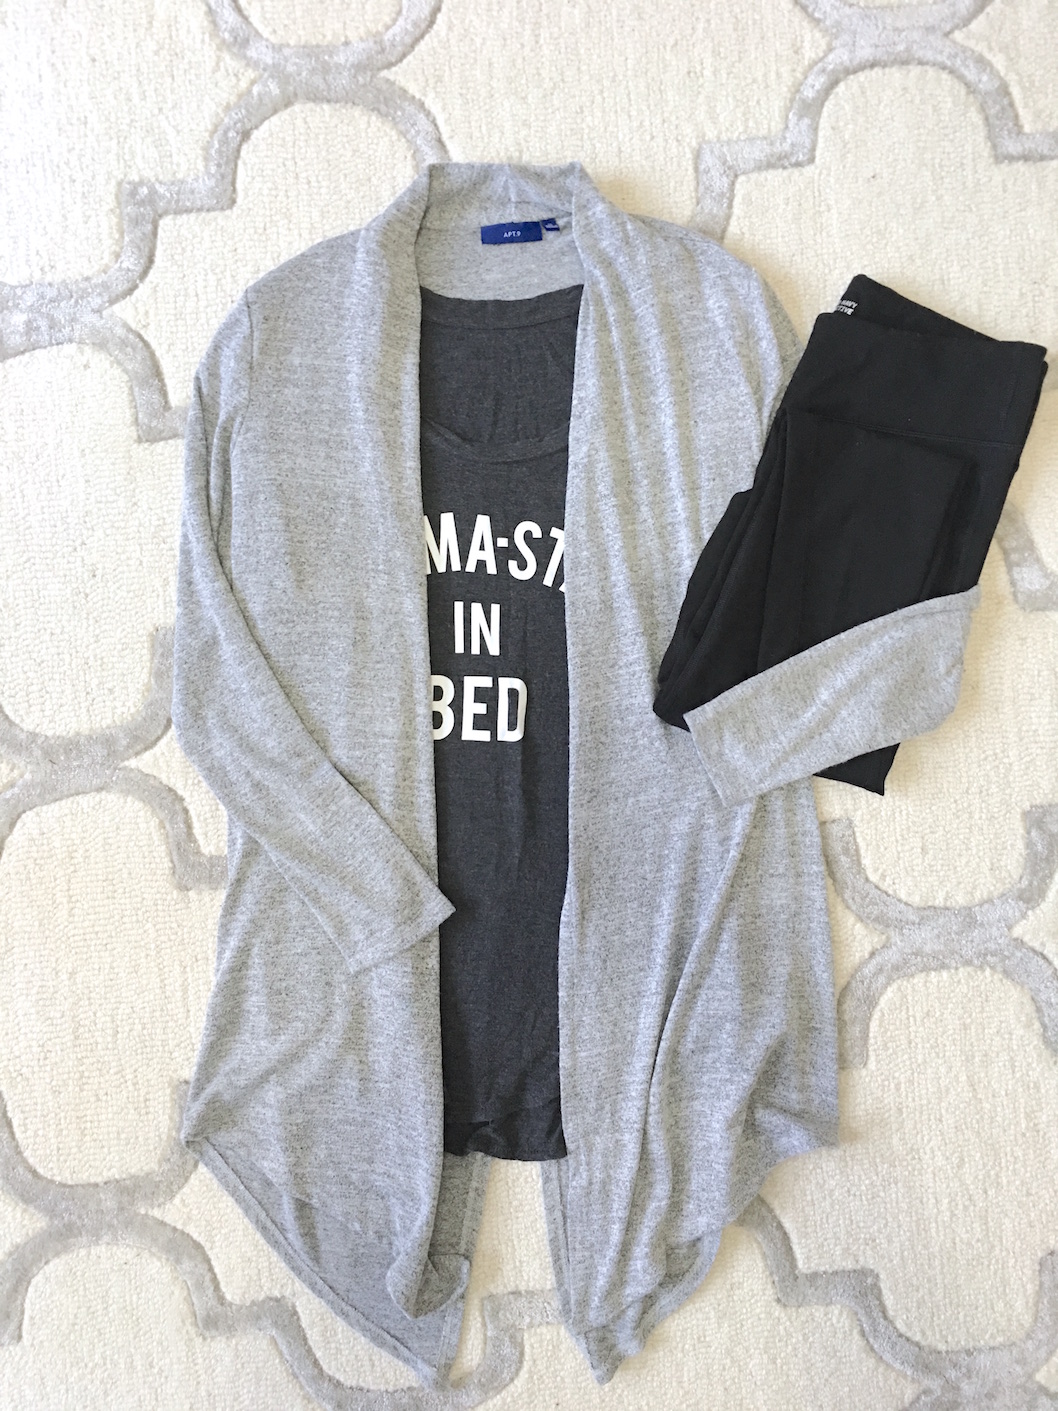 How To Create a Loungewear Capsule Wardrobe - A tee, leggings and cardigan outfit